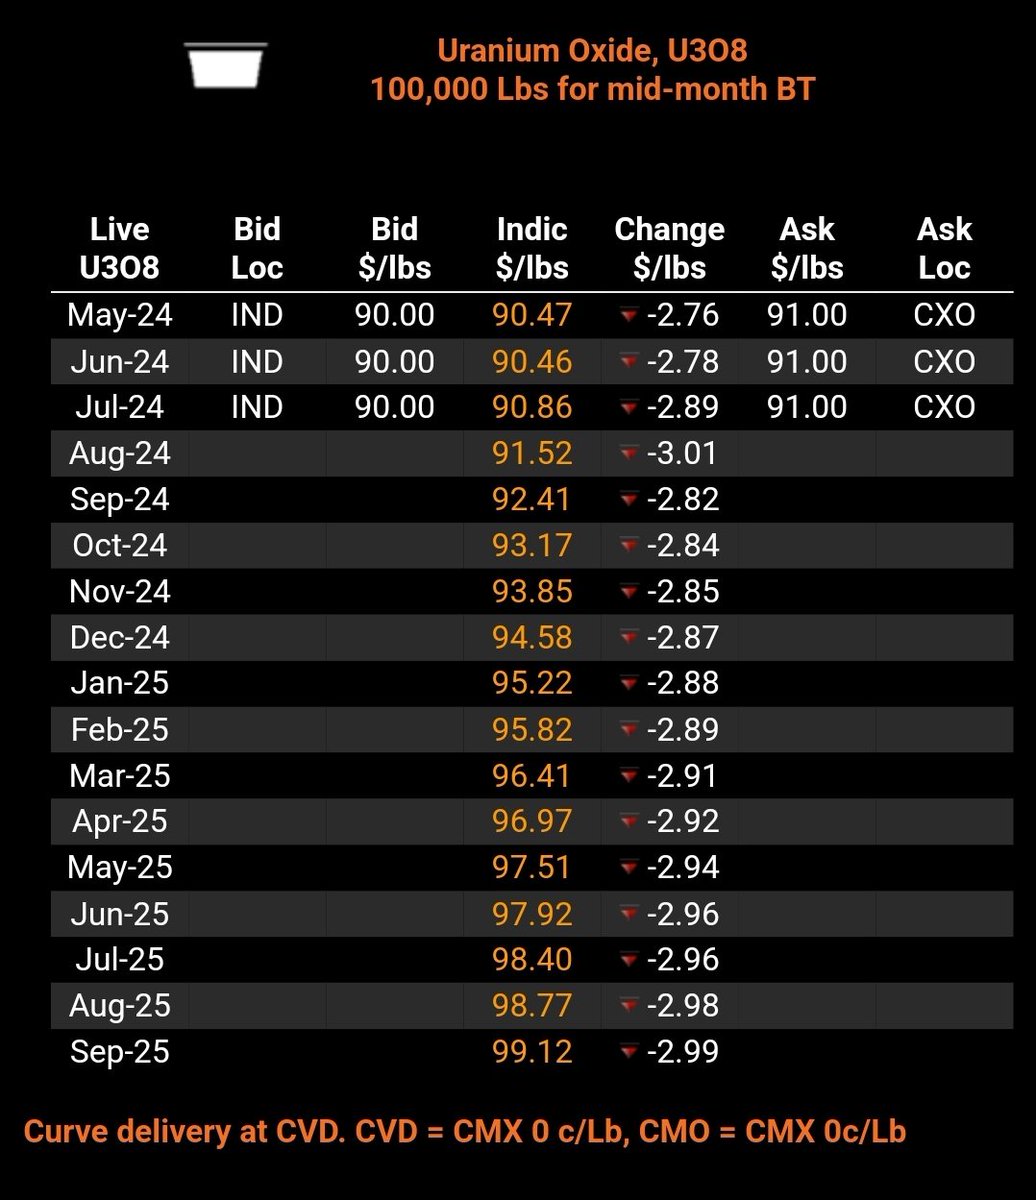 #SPUT was low on cash today after stacking 200,000 lbs #U3O8 yesterday so appears traders were able to dance Spot #Uranium down today to $91/lb at @UraniumMarkets & @EvoMarkets and $90.50 at @Numerco 🕺💃 as #Nuclear fuel consultants TradeTech pegged their Weekly Spot price.🔨 🤷‍♂️